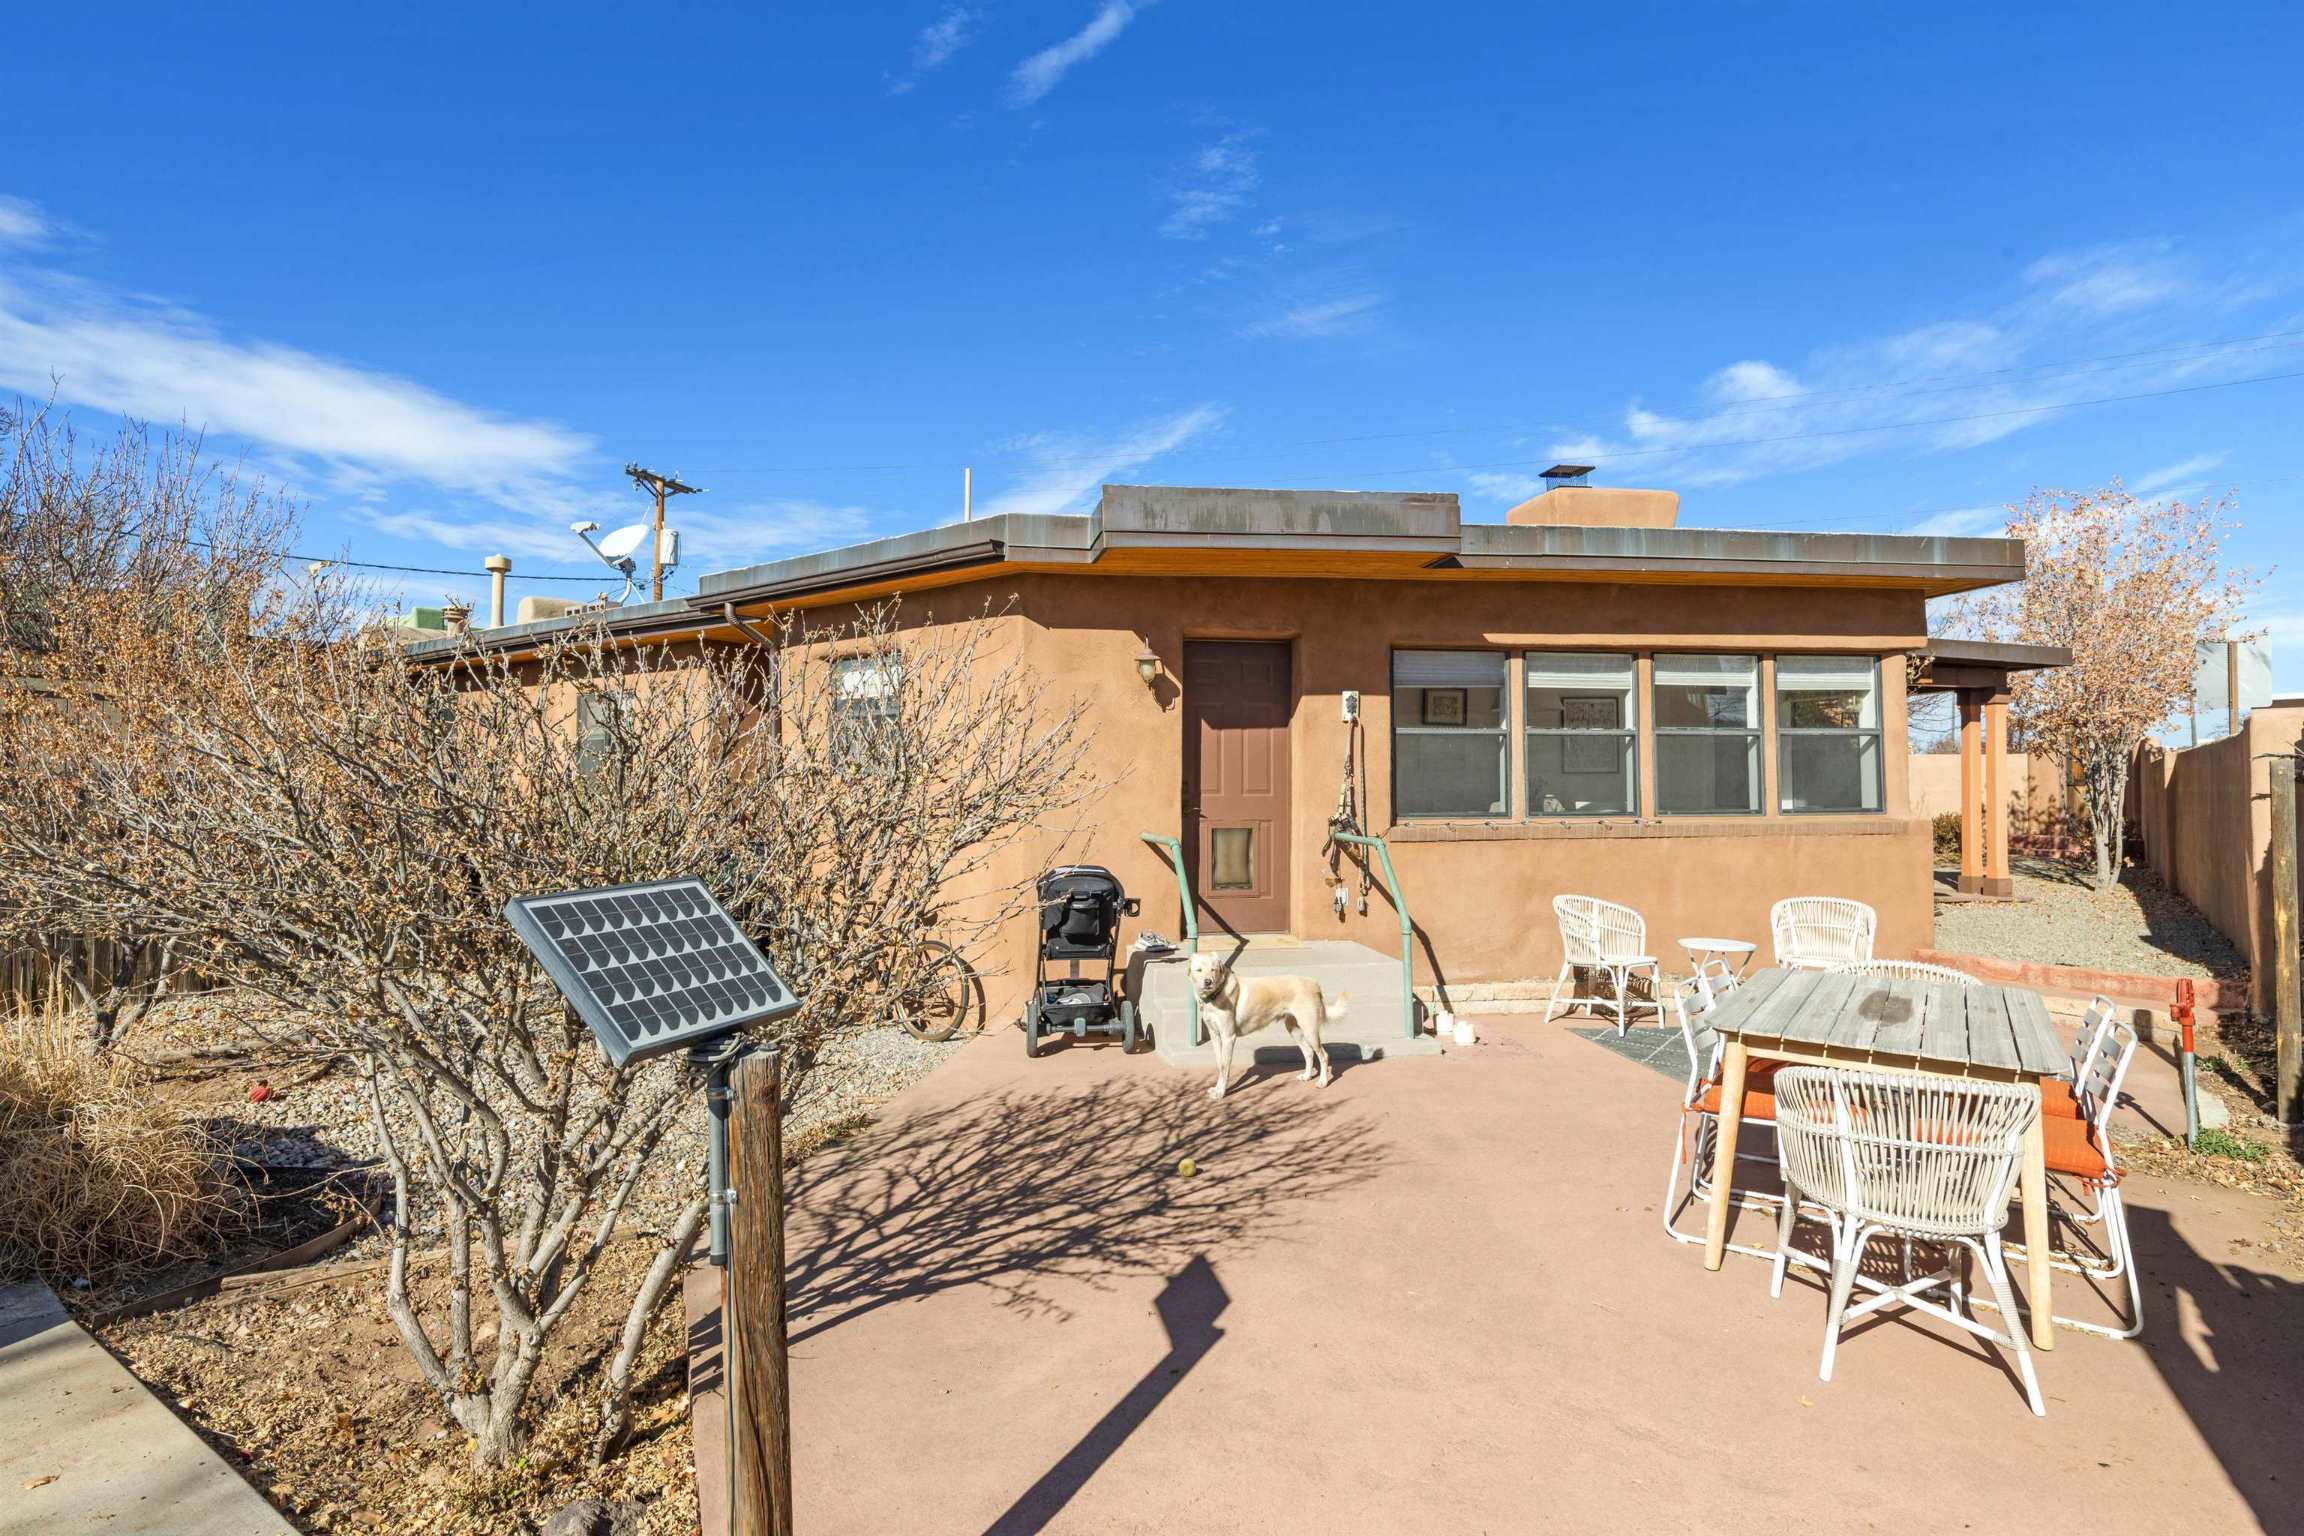 1324 Hickox, Santa Fe, New Mexico 87505, 3 Bedrooms Bedrooms, ,2 BathroomsBathrooms,Residential,For Sale,1324 Hickox,202105139